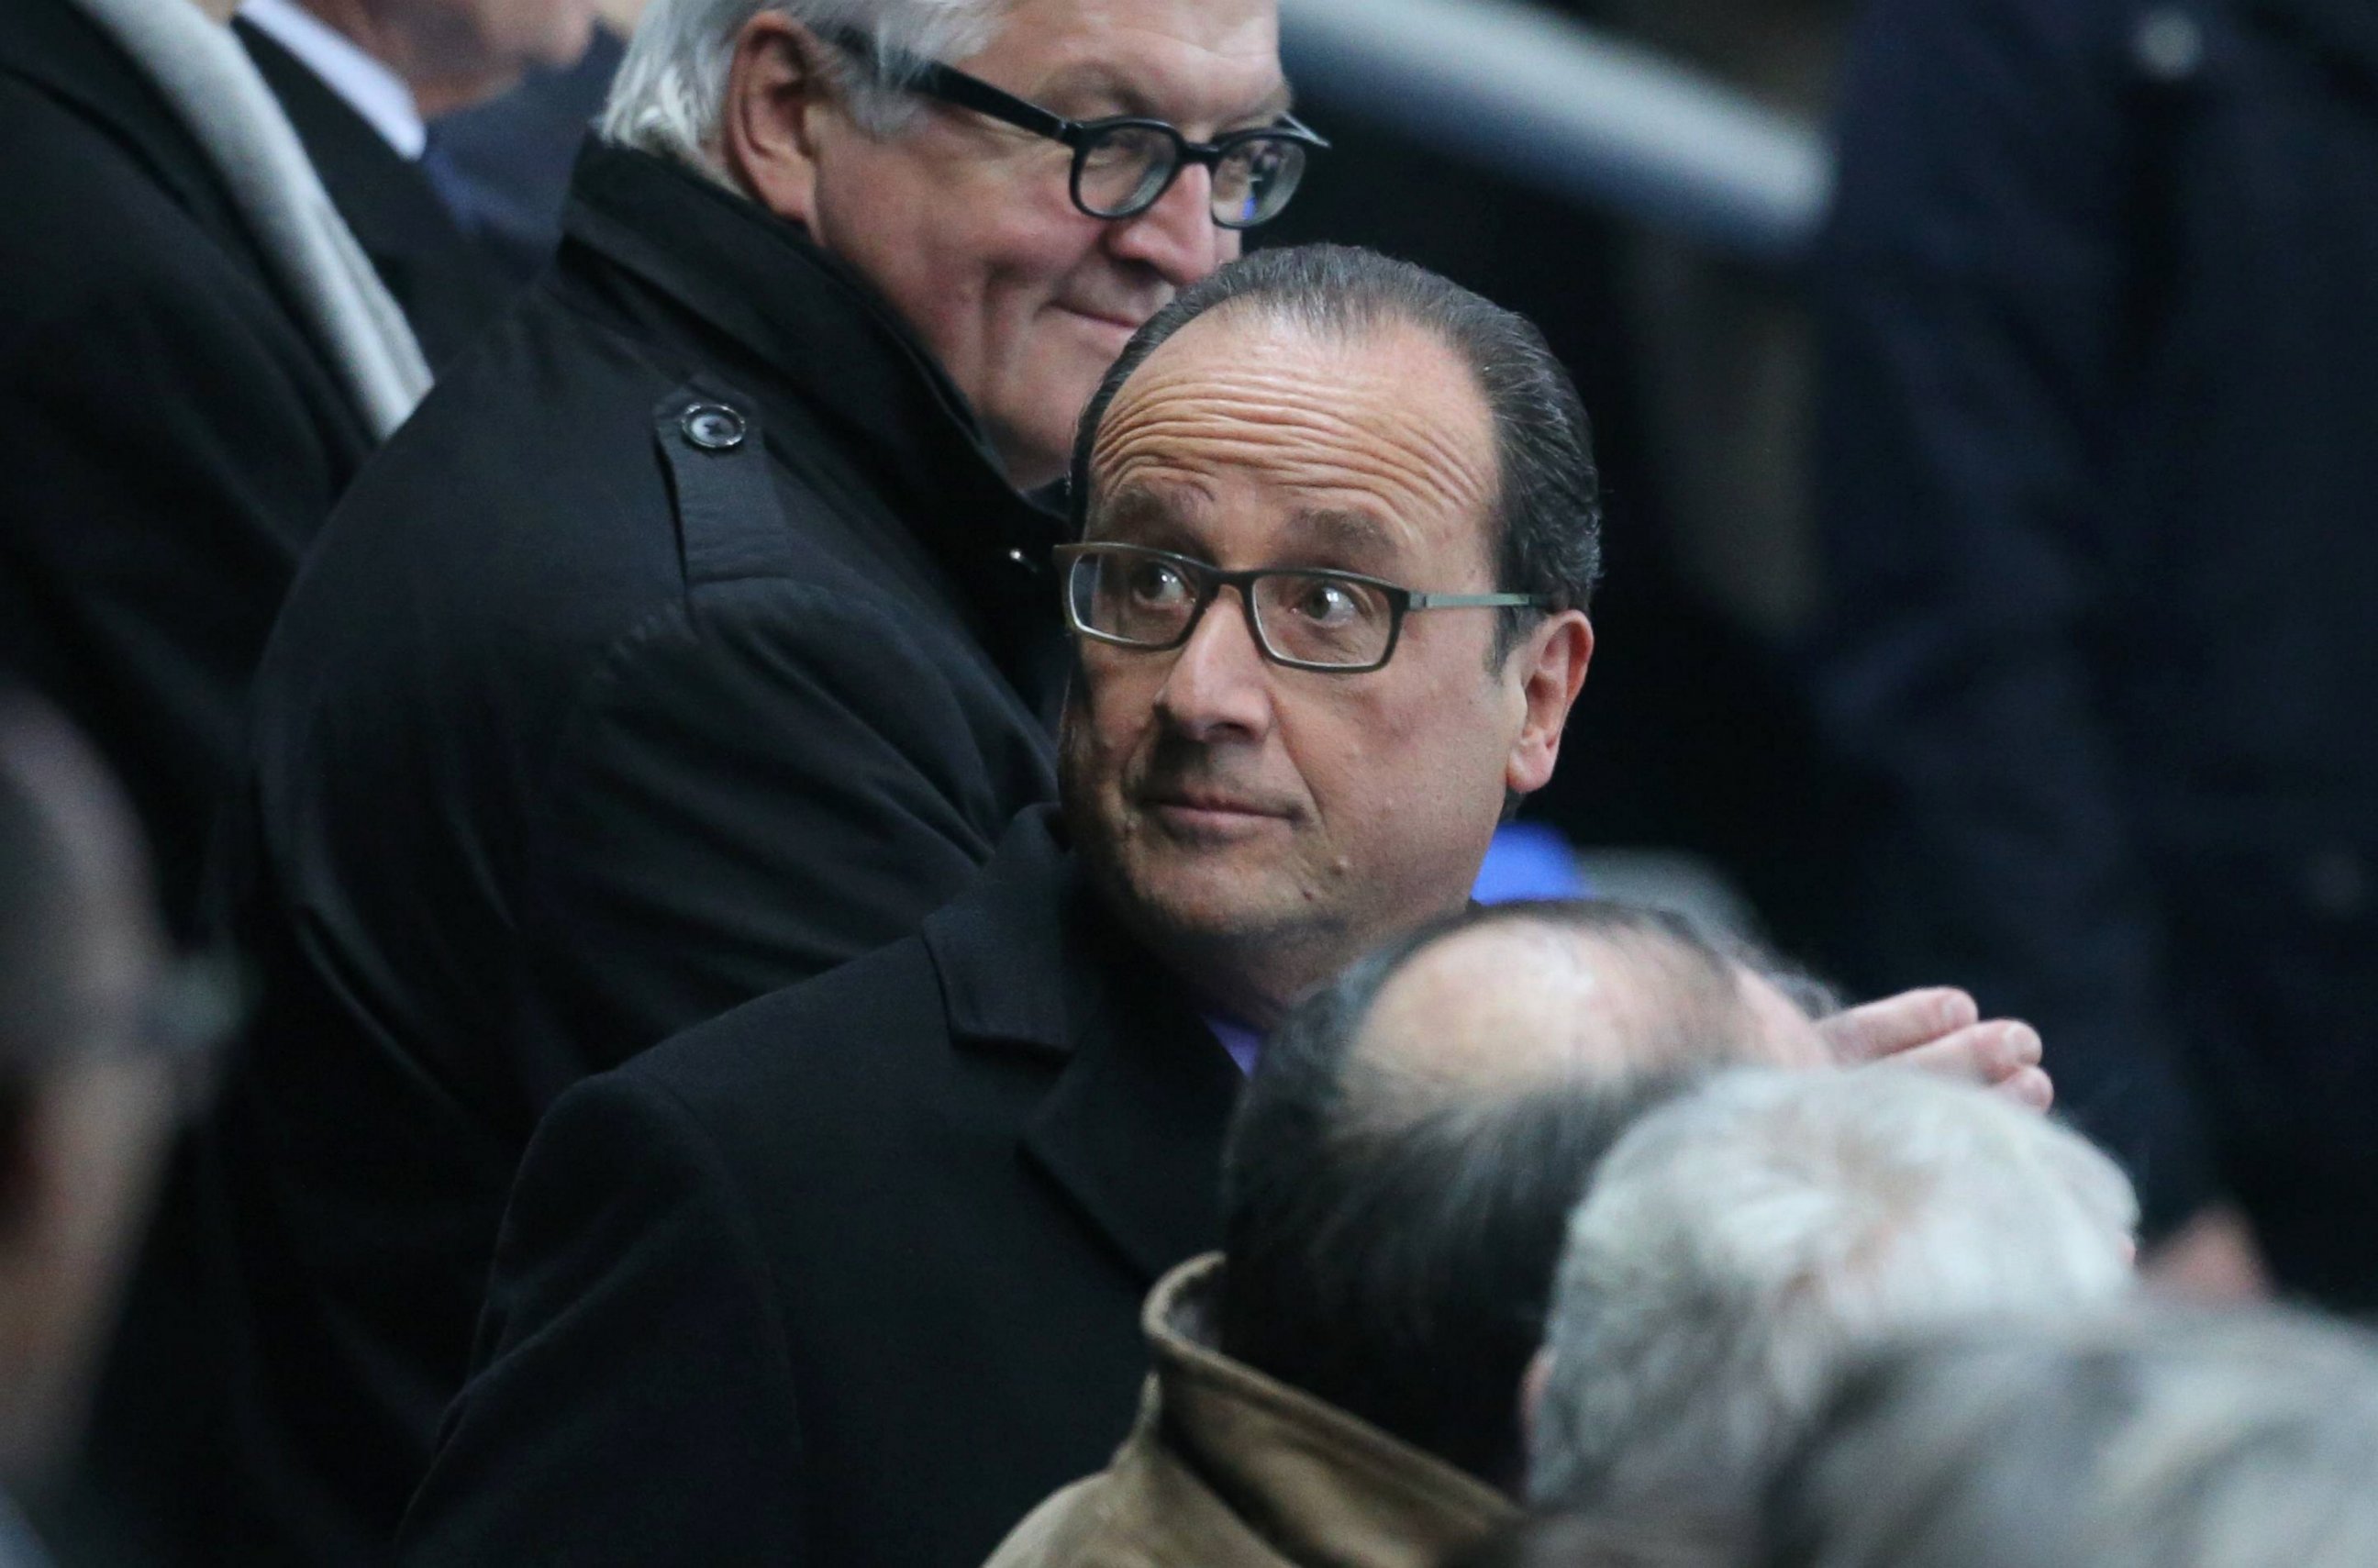 PHOTO: French President Francois Hollande is escorted out of the Stade de France by his security team after reports emerge of a series of violent incidents in and around Paris on Nov. 13, 2015.